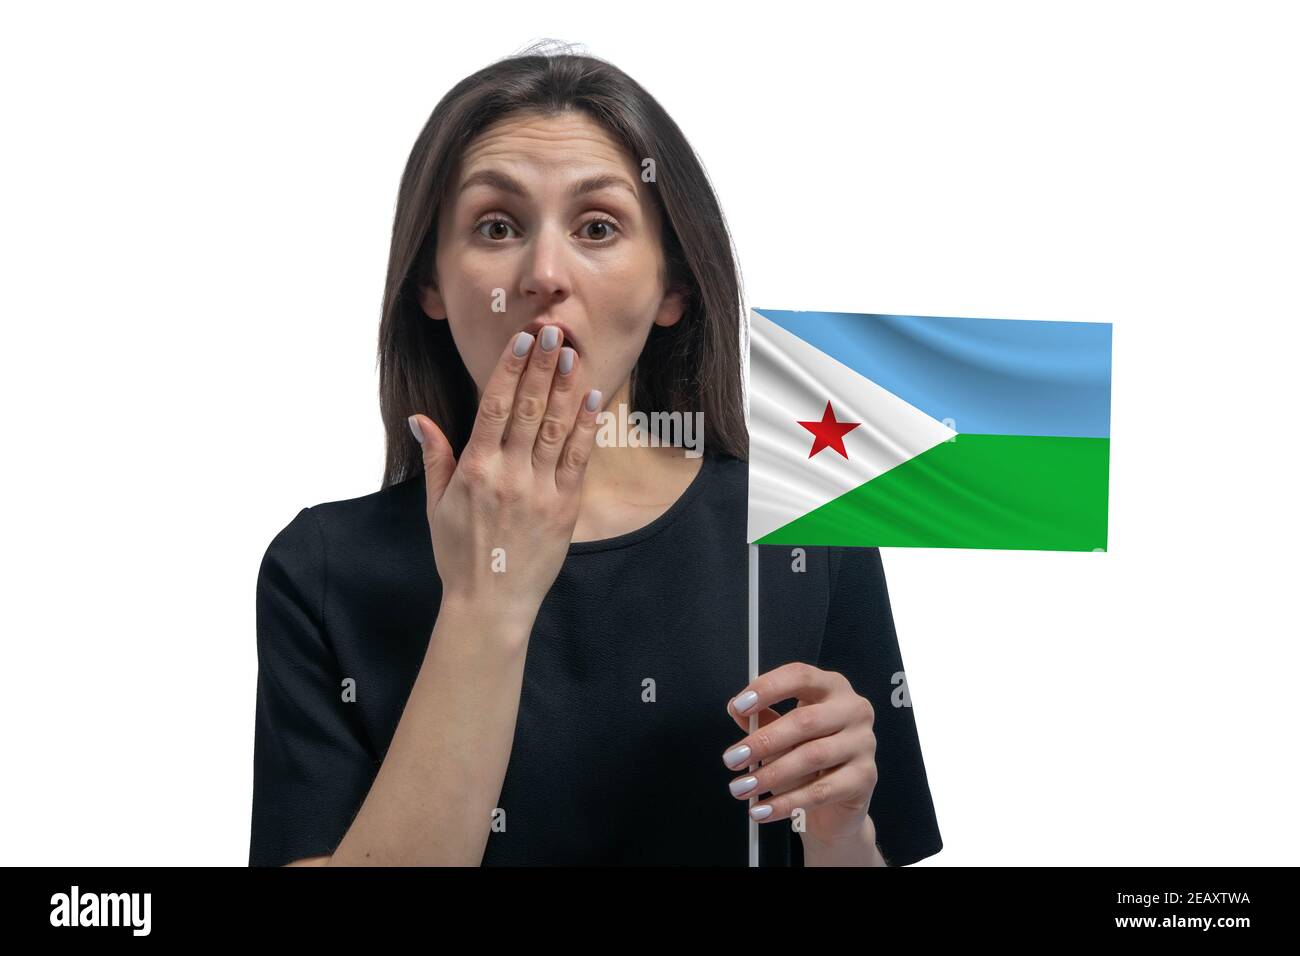 Happy young white woman holding flag of Djibouti and covers her mouth with her hand isolated on a white background. Stock Photo